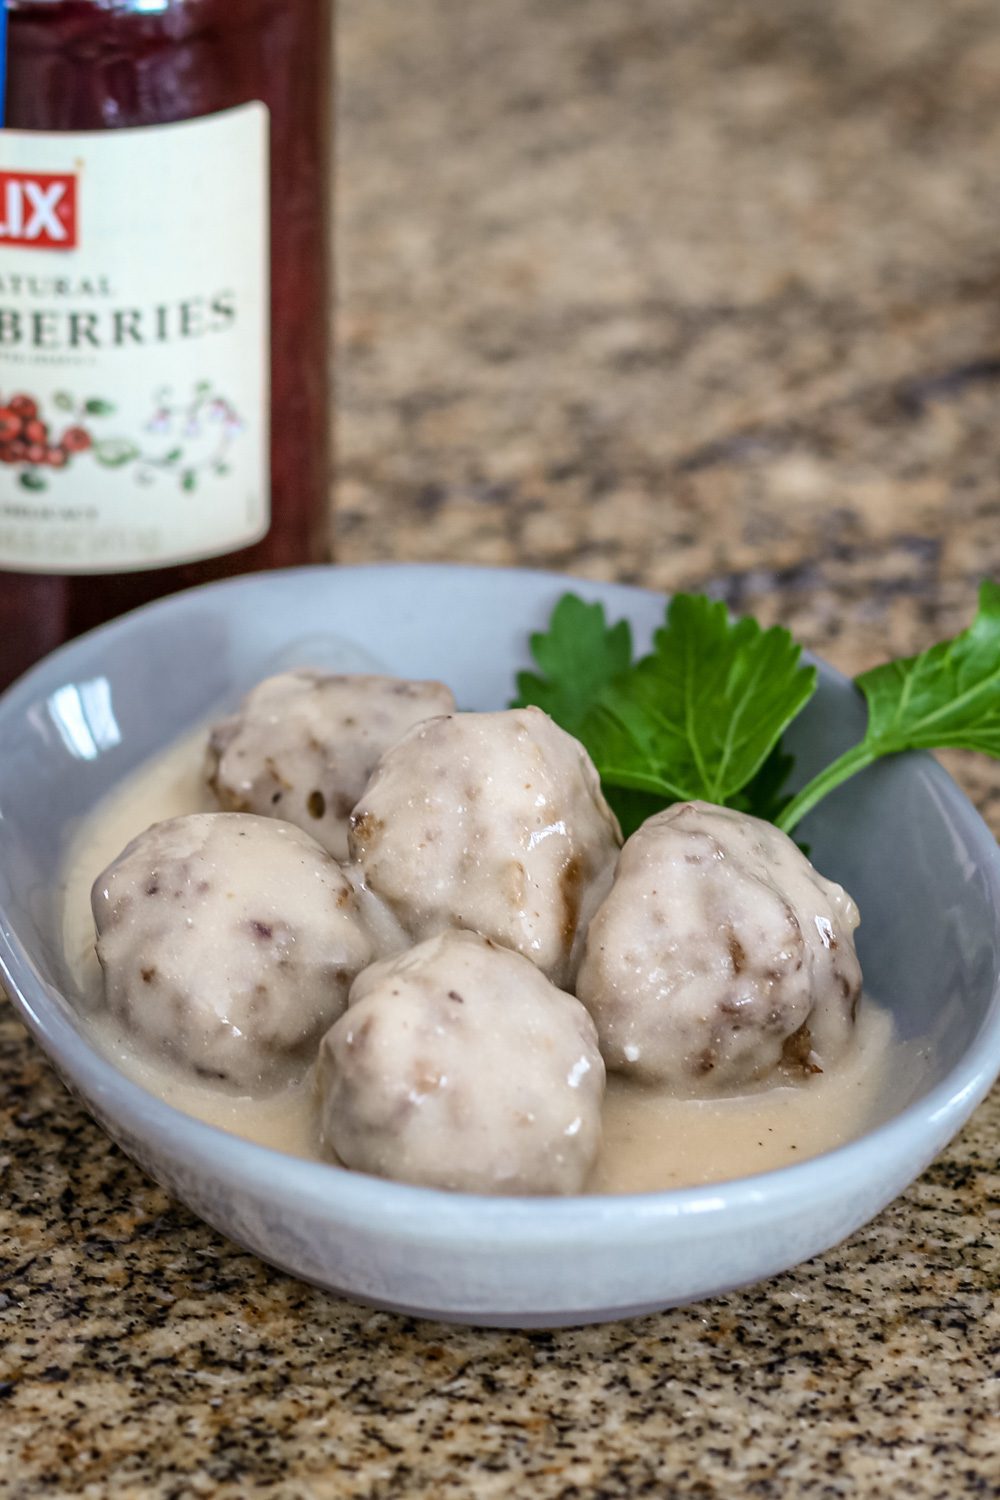 Swedish meatballs in a bowl with parsley